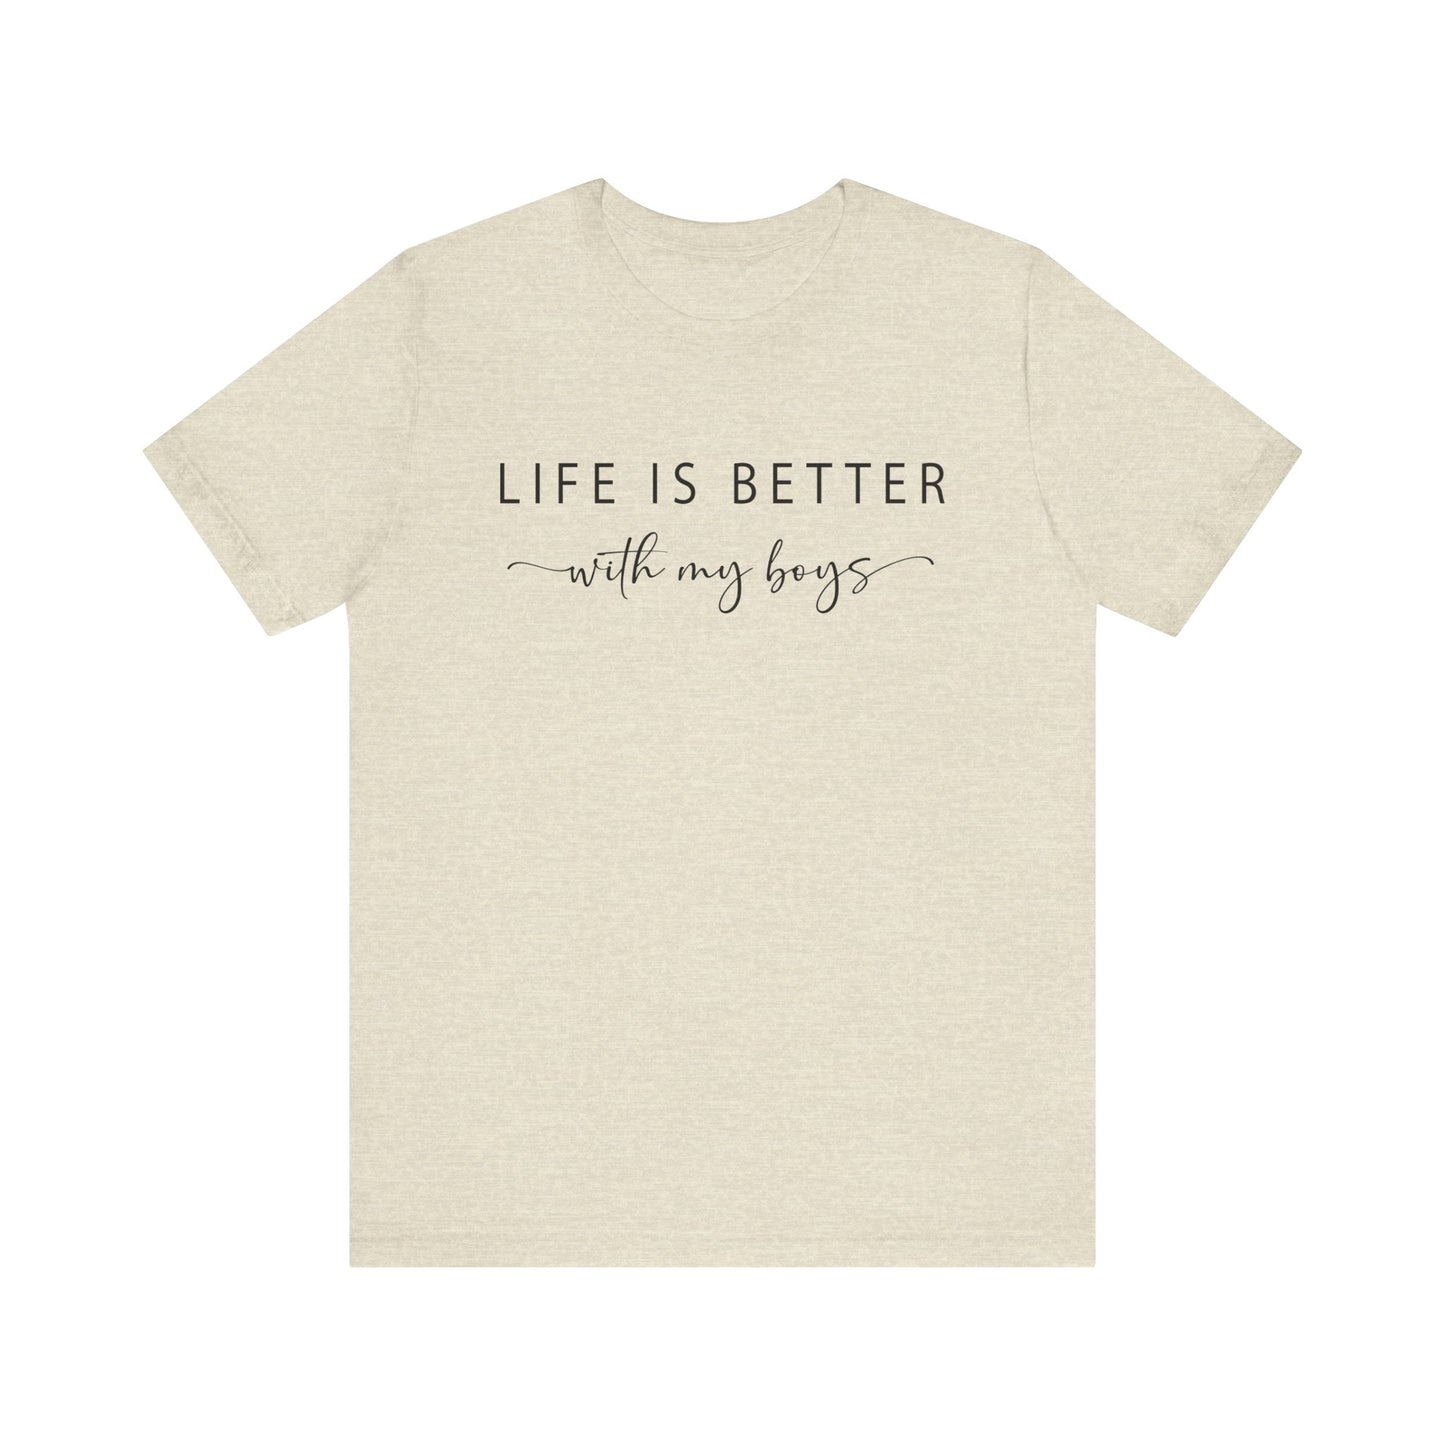 Life is Better With My Boys Women's Tshirt Short Sleeve Shirt